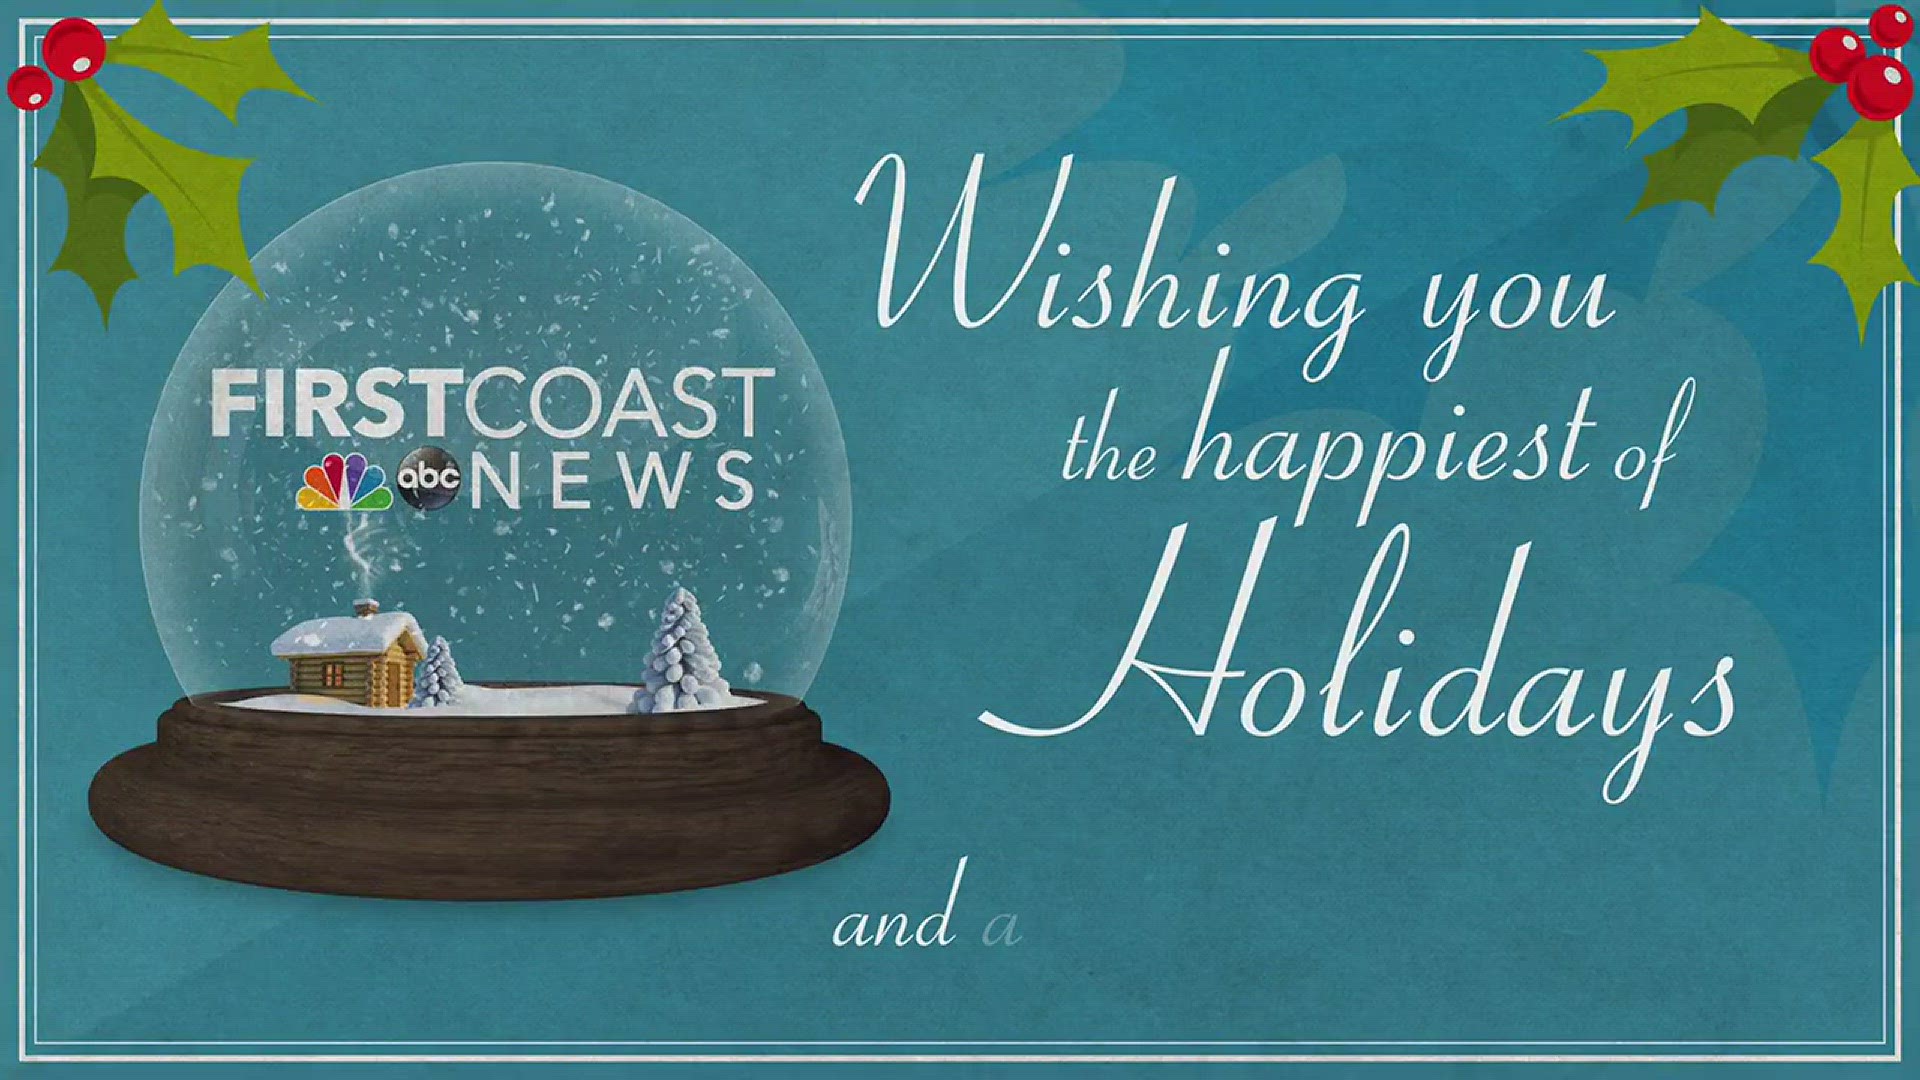 From our FCN family to yours, have a happy holiday season and prosperous New Year!